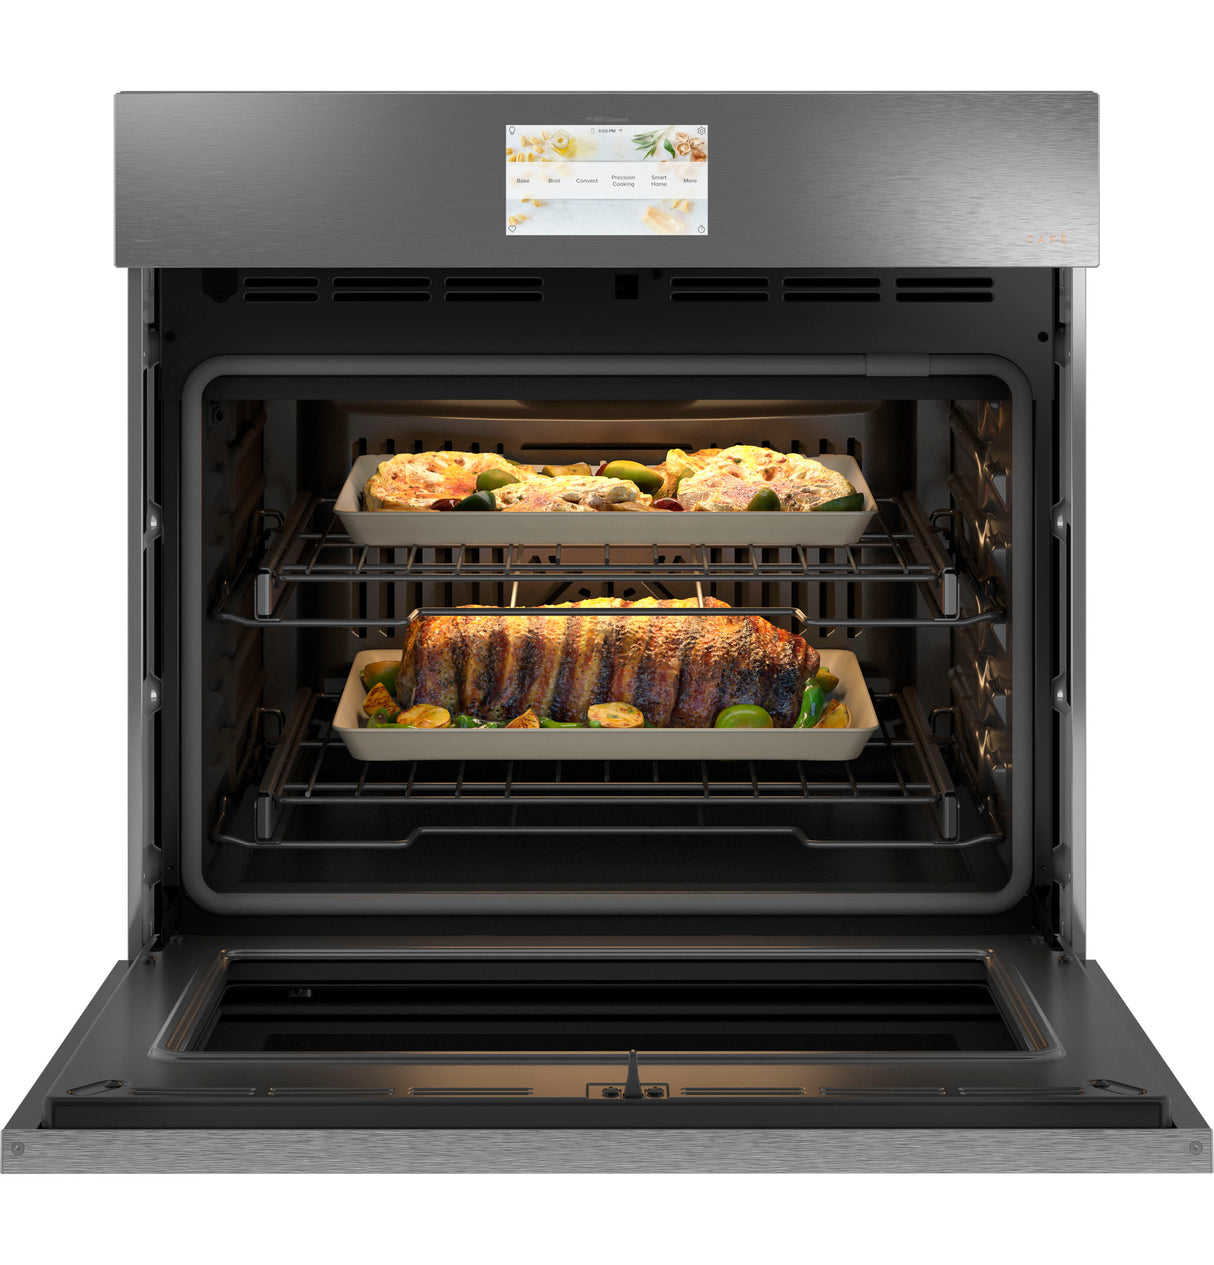 Caf(eback)(TM) 30" Smart Built-In Convection Single Wall Oven in Platinum Glass - (CTS90DM2NS5)